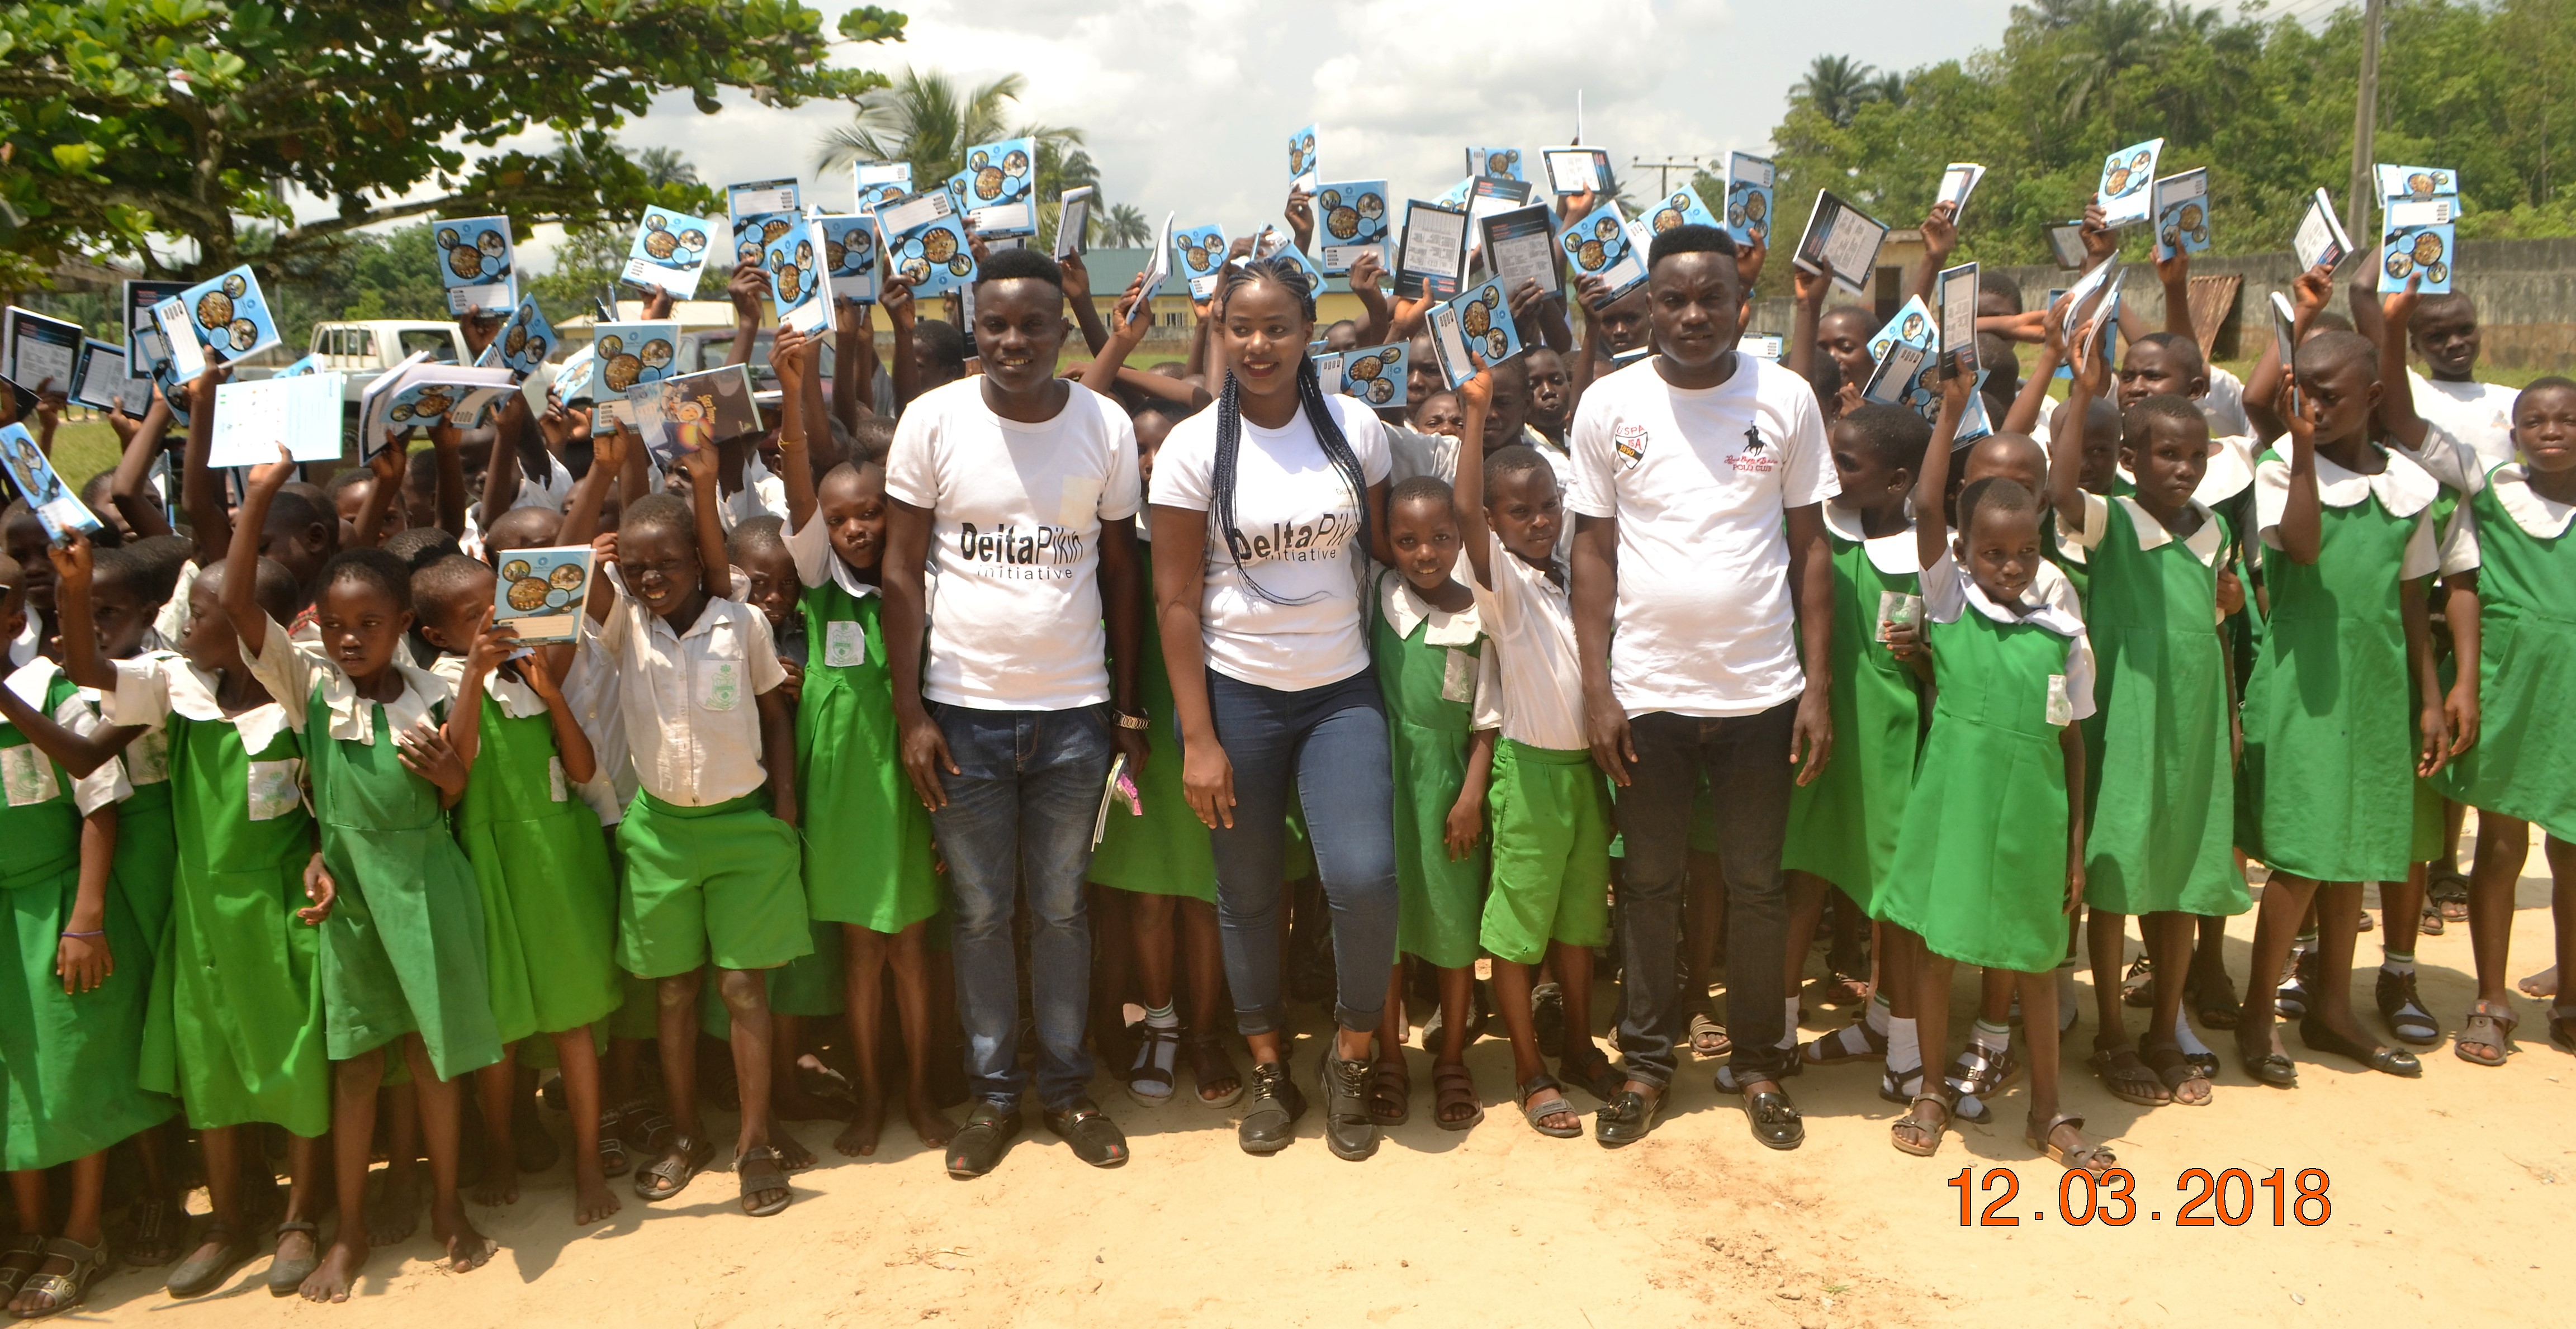 Rural Education: We've supported over 1,000 pupils-NGO